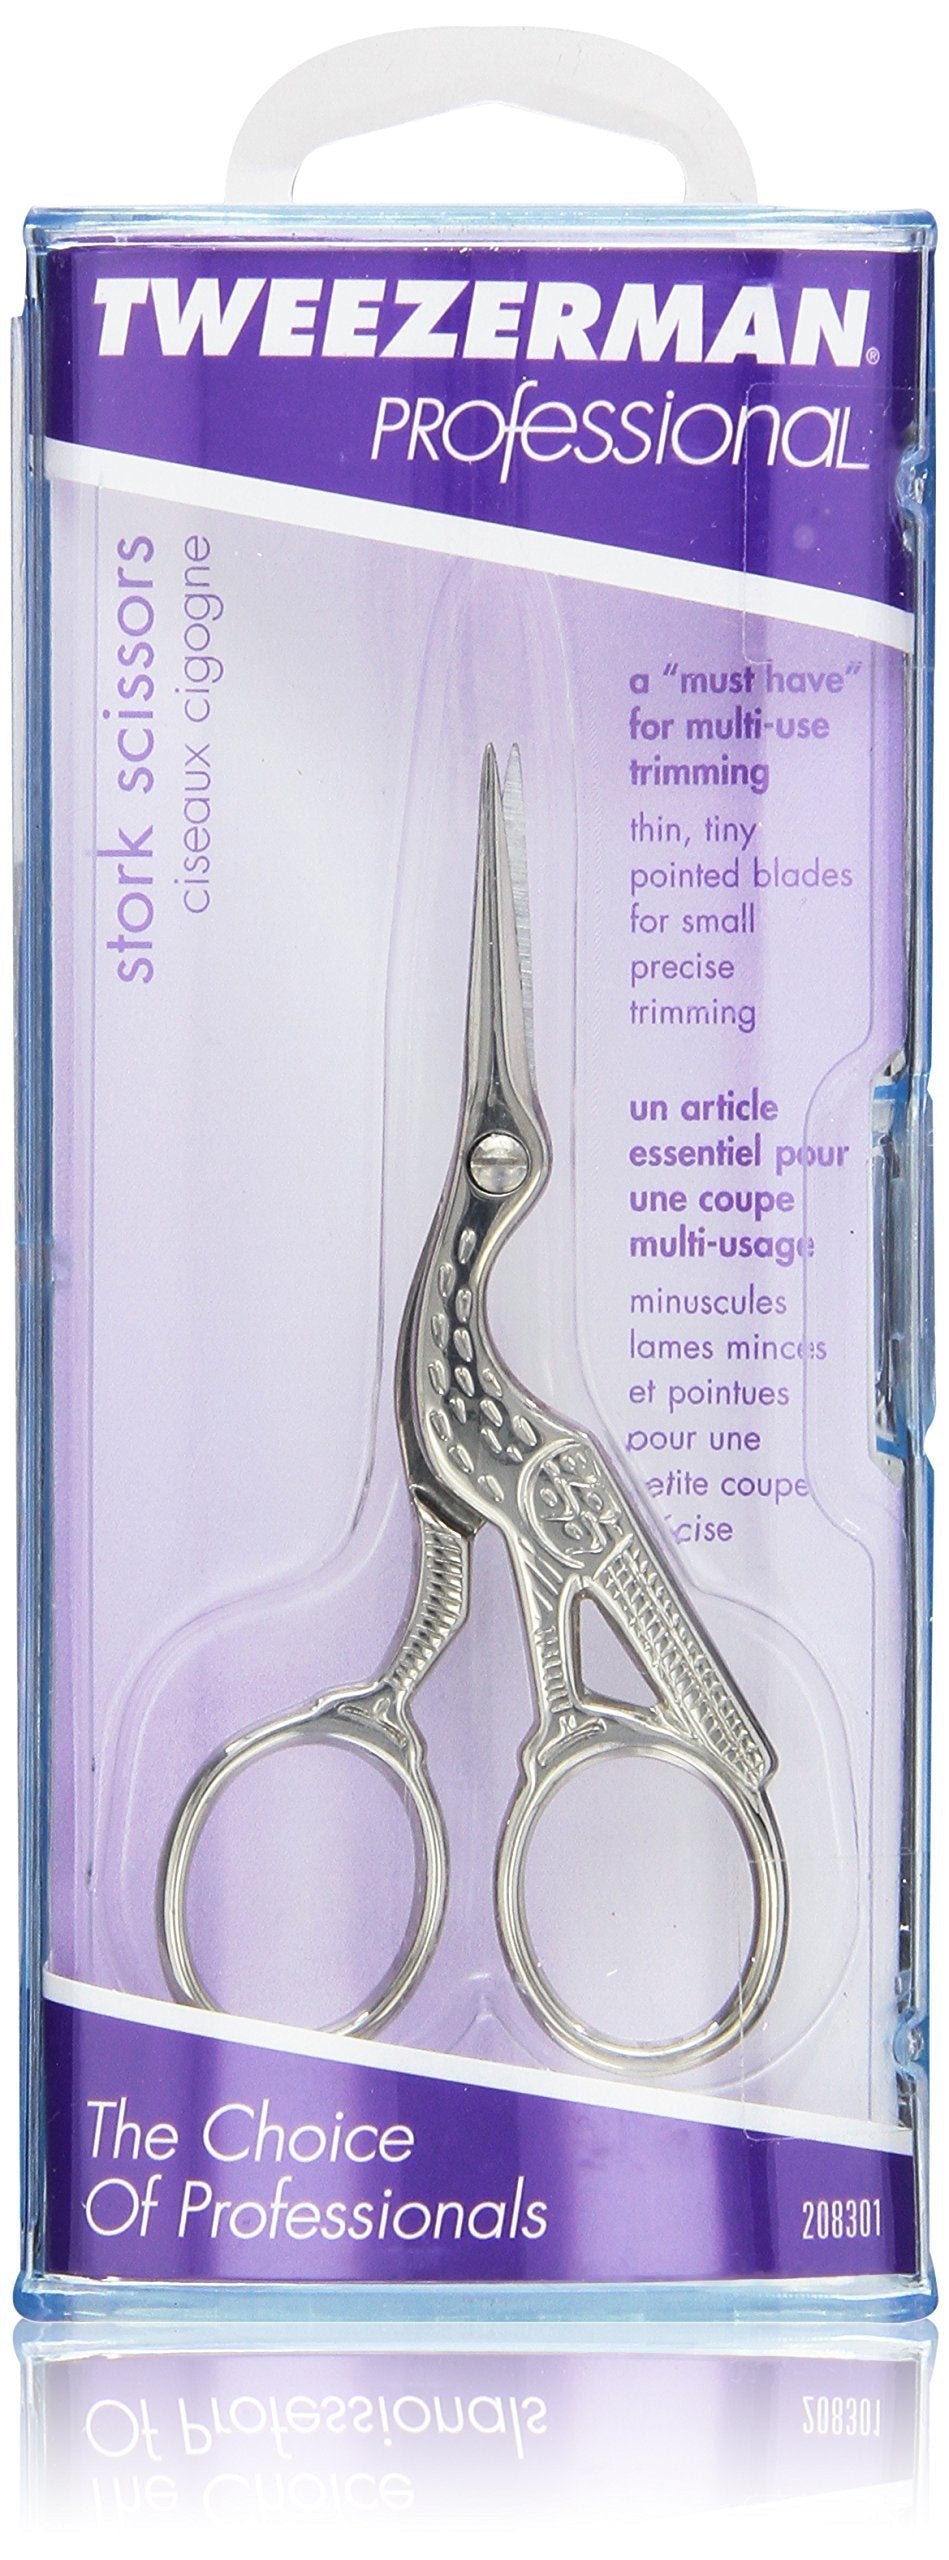 [Australia] - Tweezerman Professional Stork Scissors Used for Trimming Brows and Facial Hair (ZW-3042-P) 